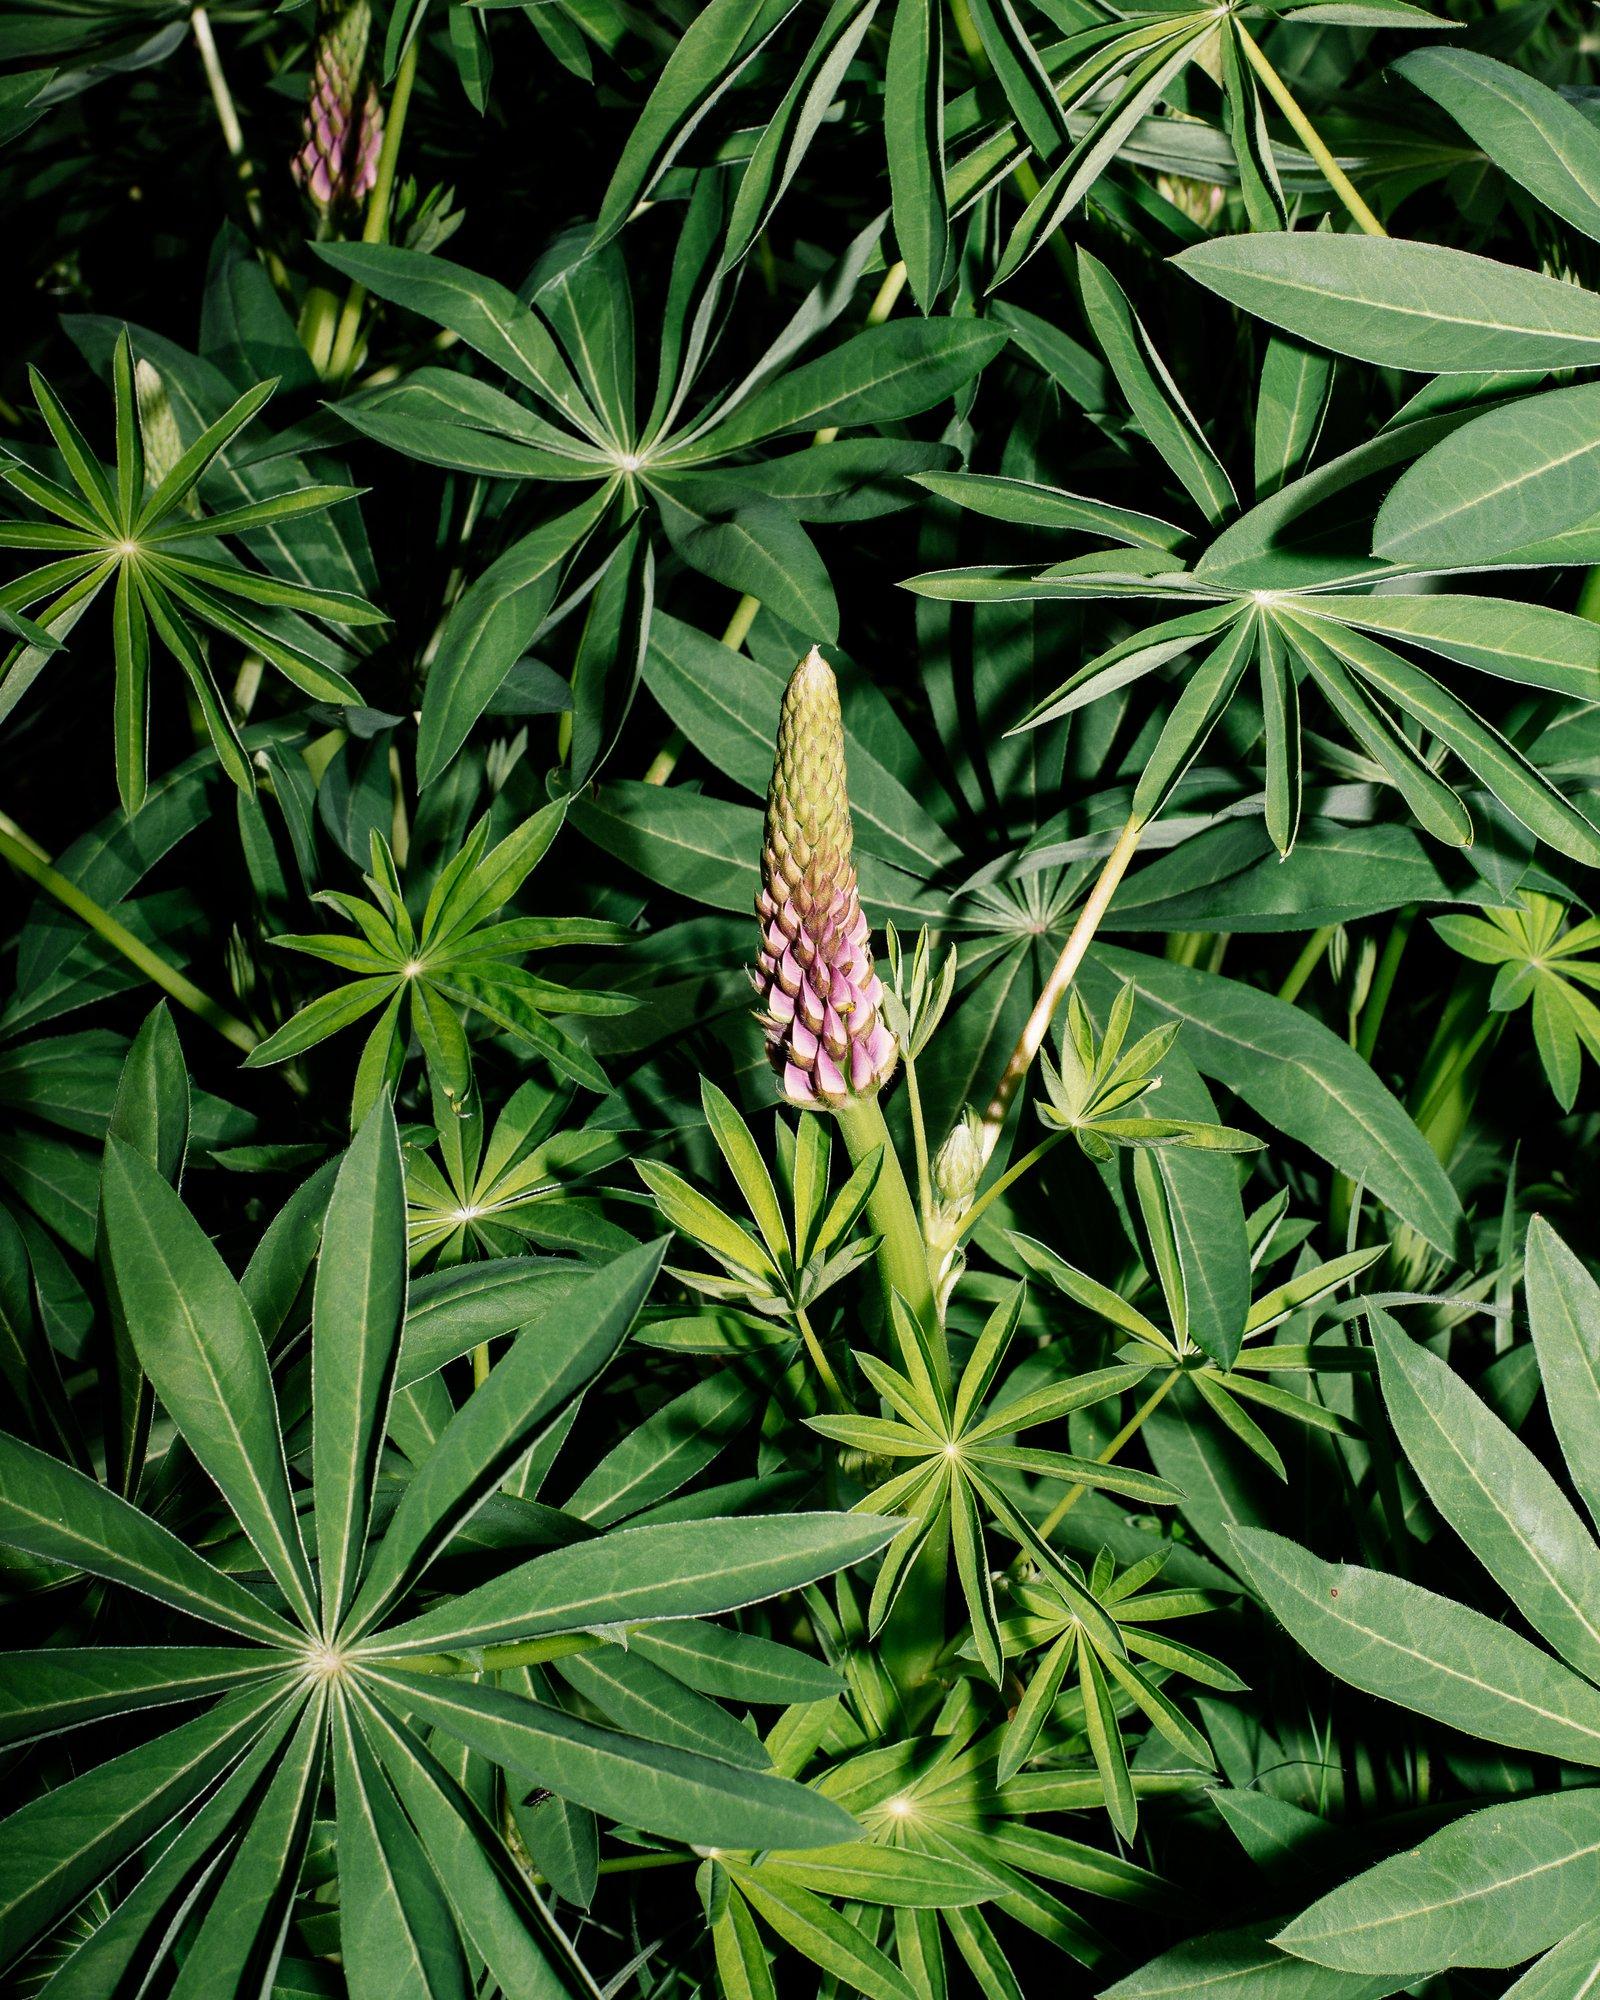 Lupin, a legume, begins producing colourful flowers in the spring 